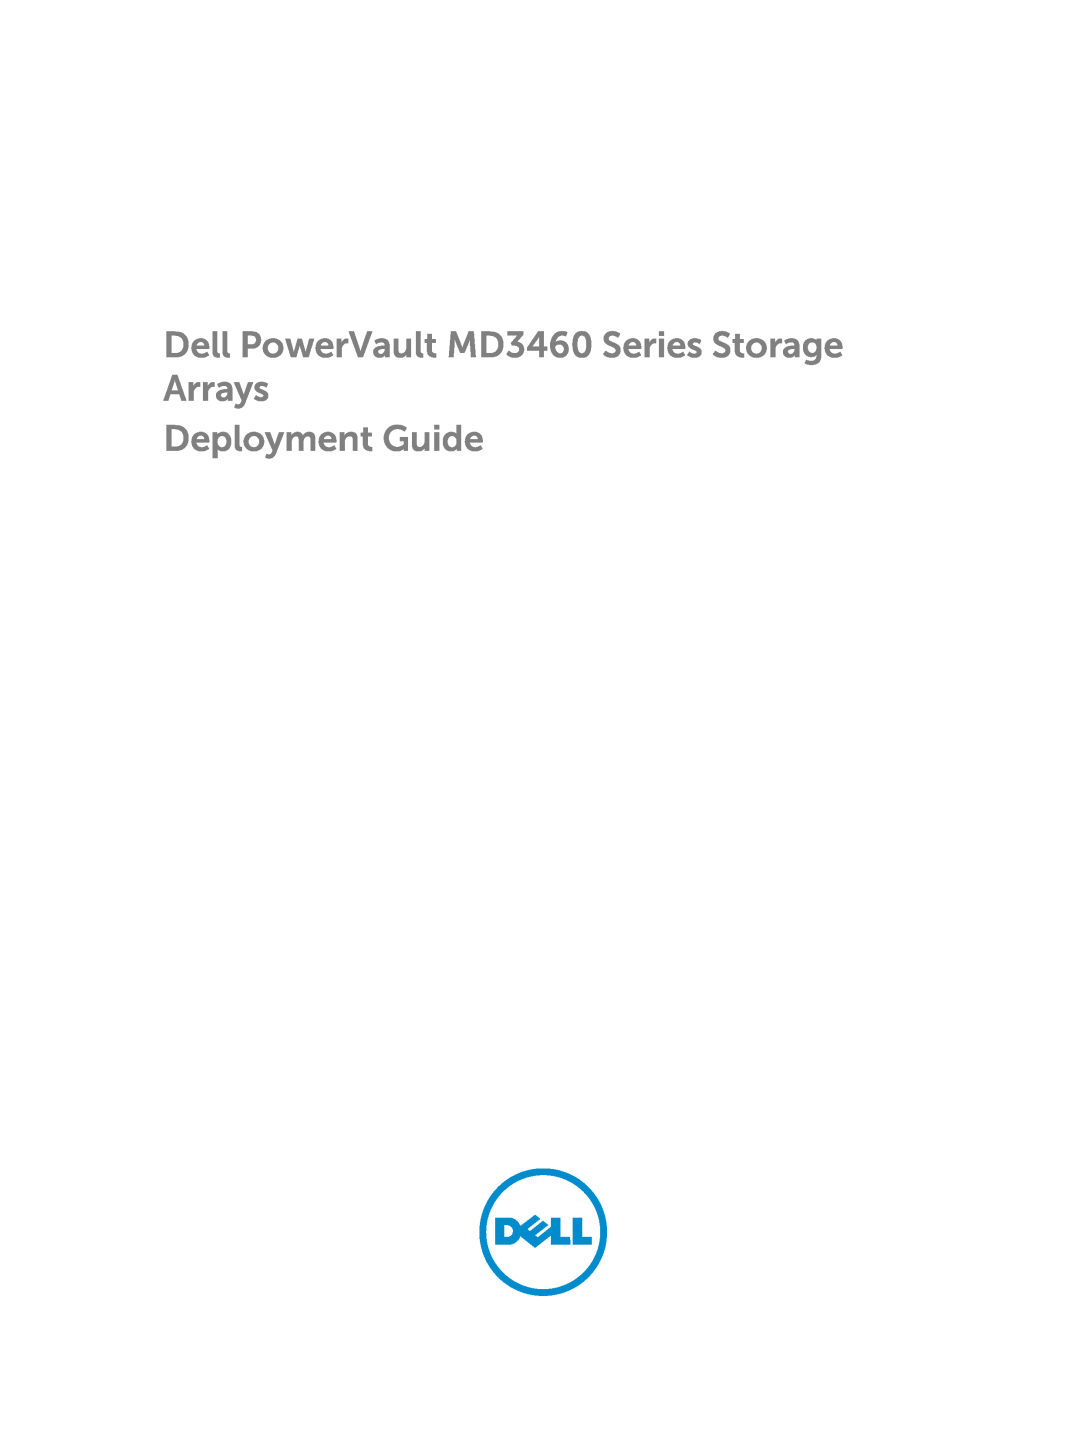 Dell manual Dell PowerVault MD3460 Series Storage Arrays Deployment Guide 